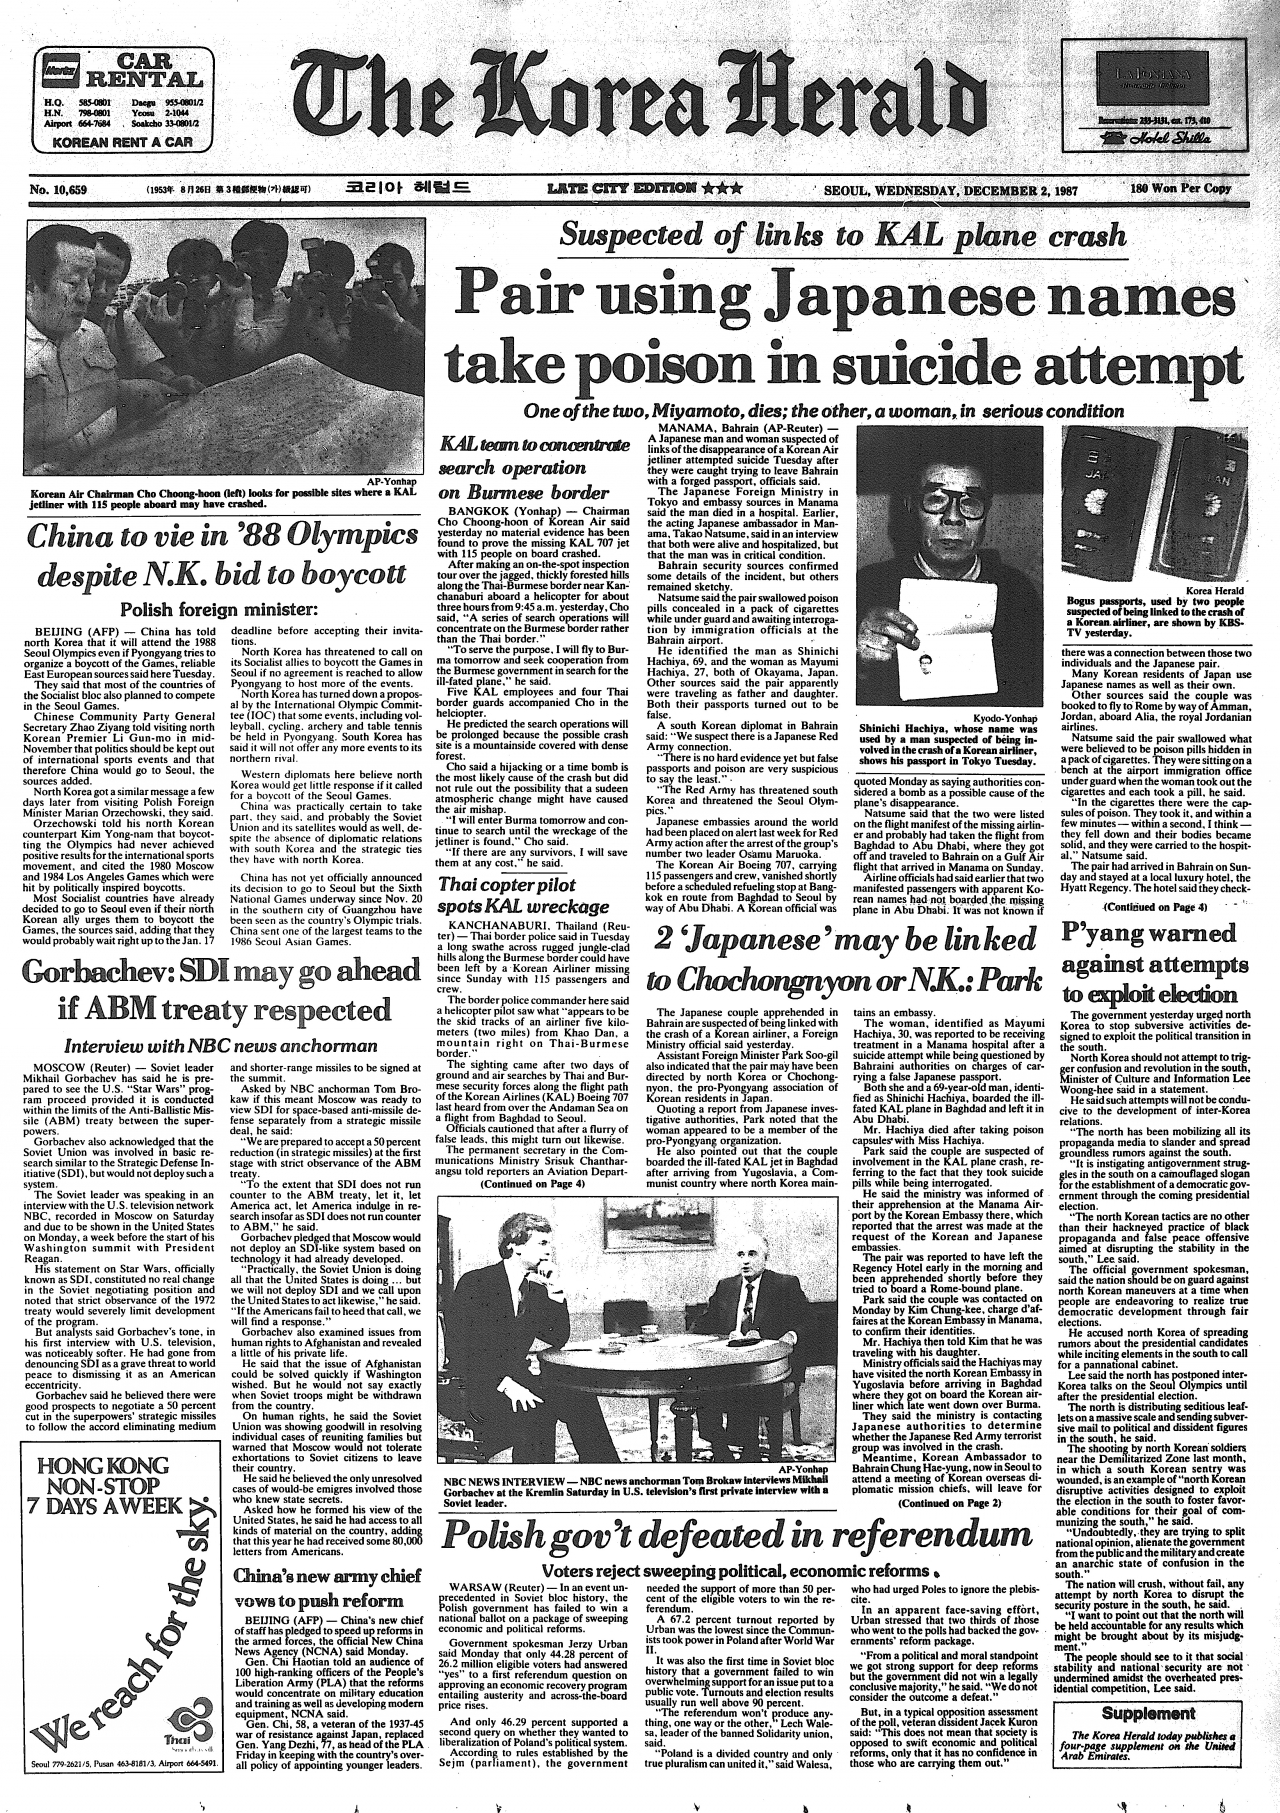 Front page of the Dec. 2, 1987 issue of The Korea Herald